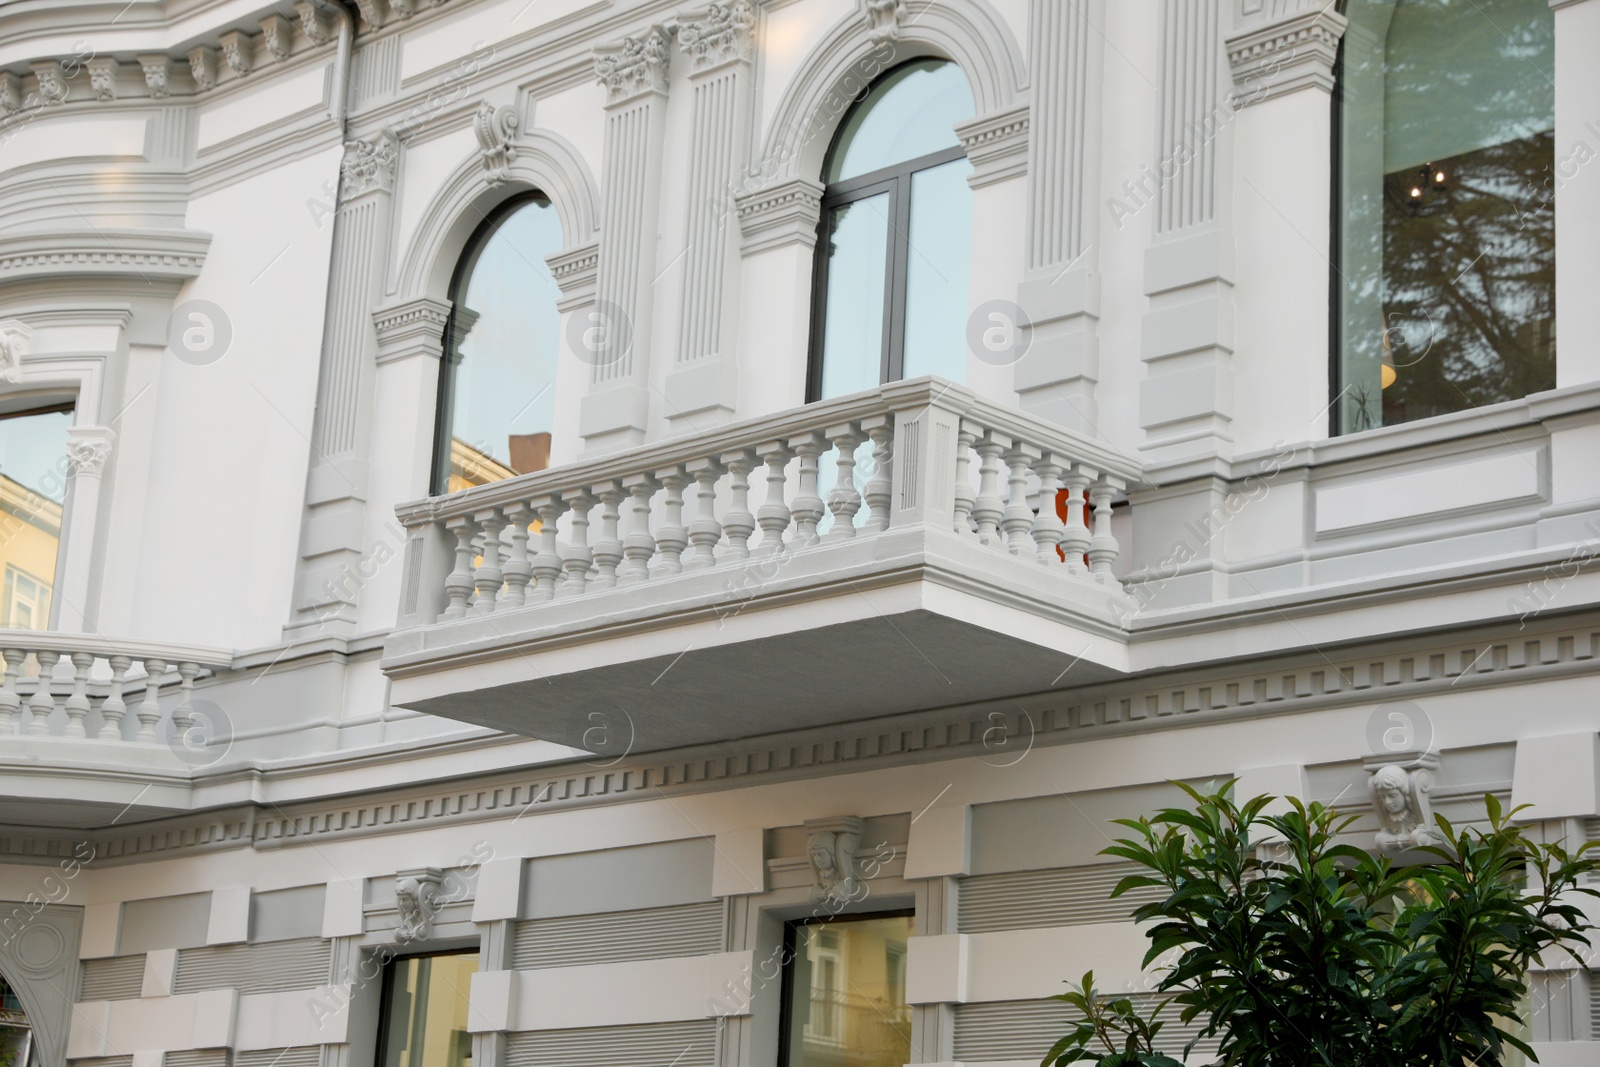 Photo of Exterior of beautiful building with balcony outdoors